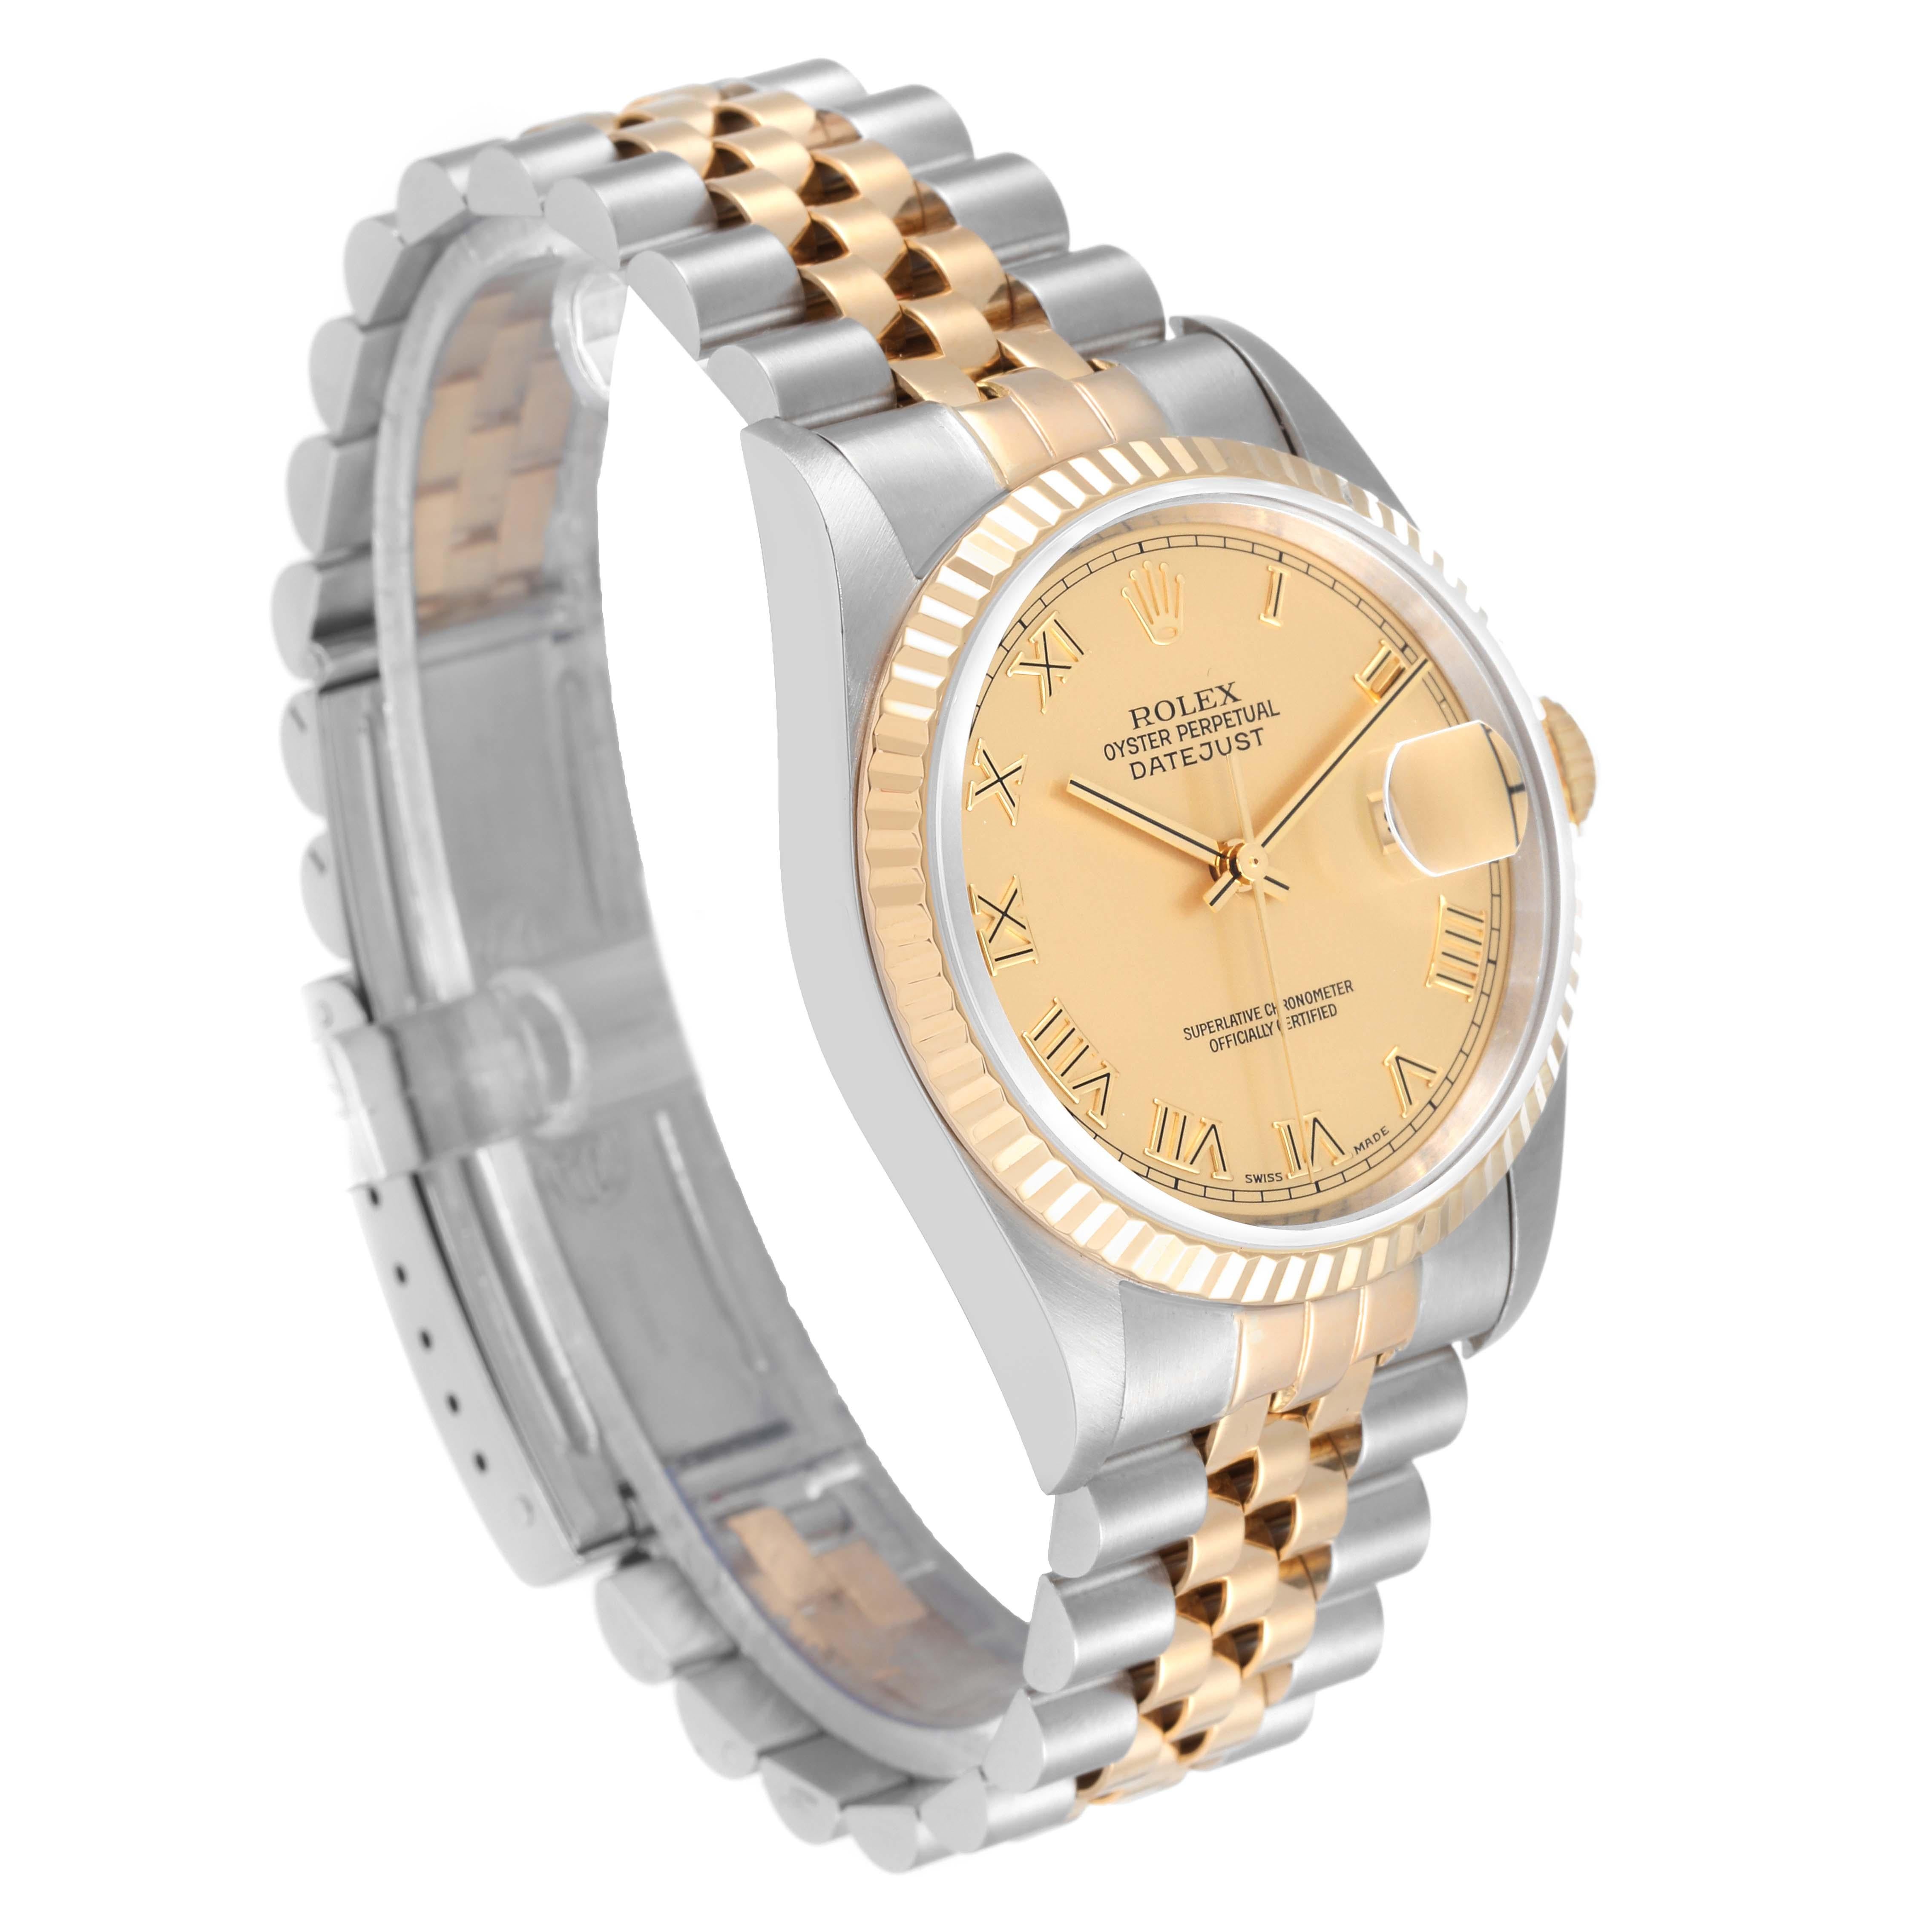 Rolex Datejust Steel Yellow Gold Champagne Dial Mens Watch 16233 In Excellent Condition For Sale In Atlanta, GA